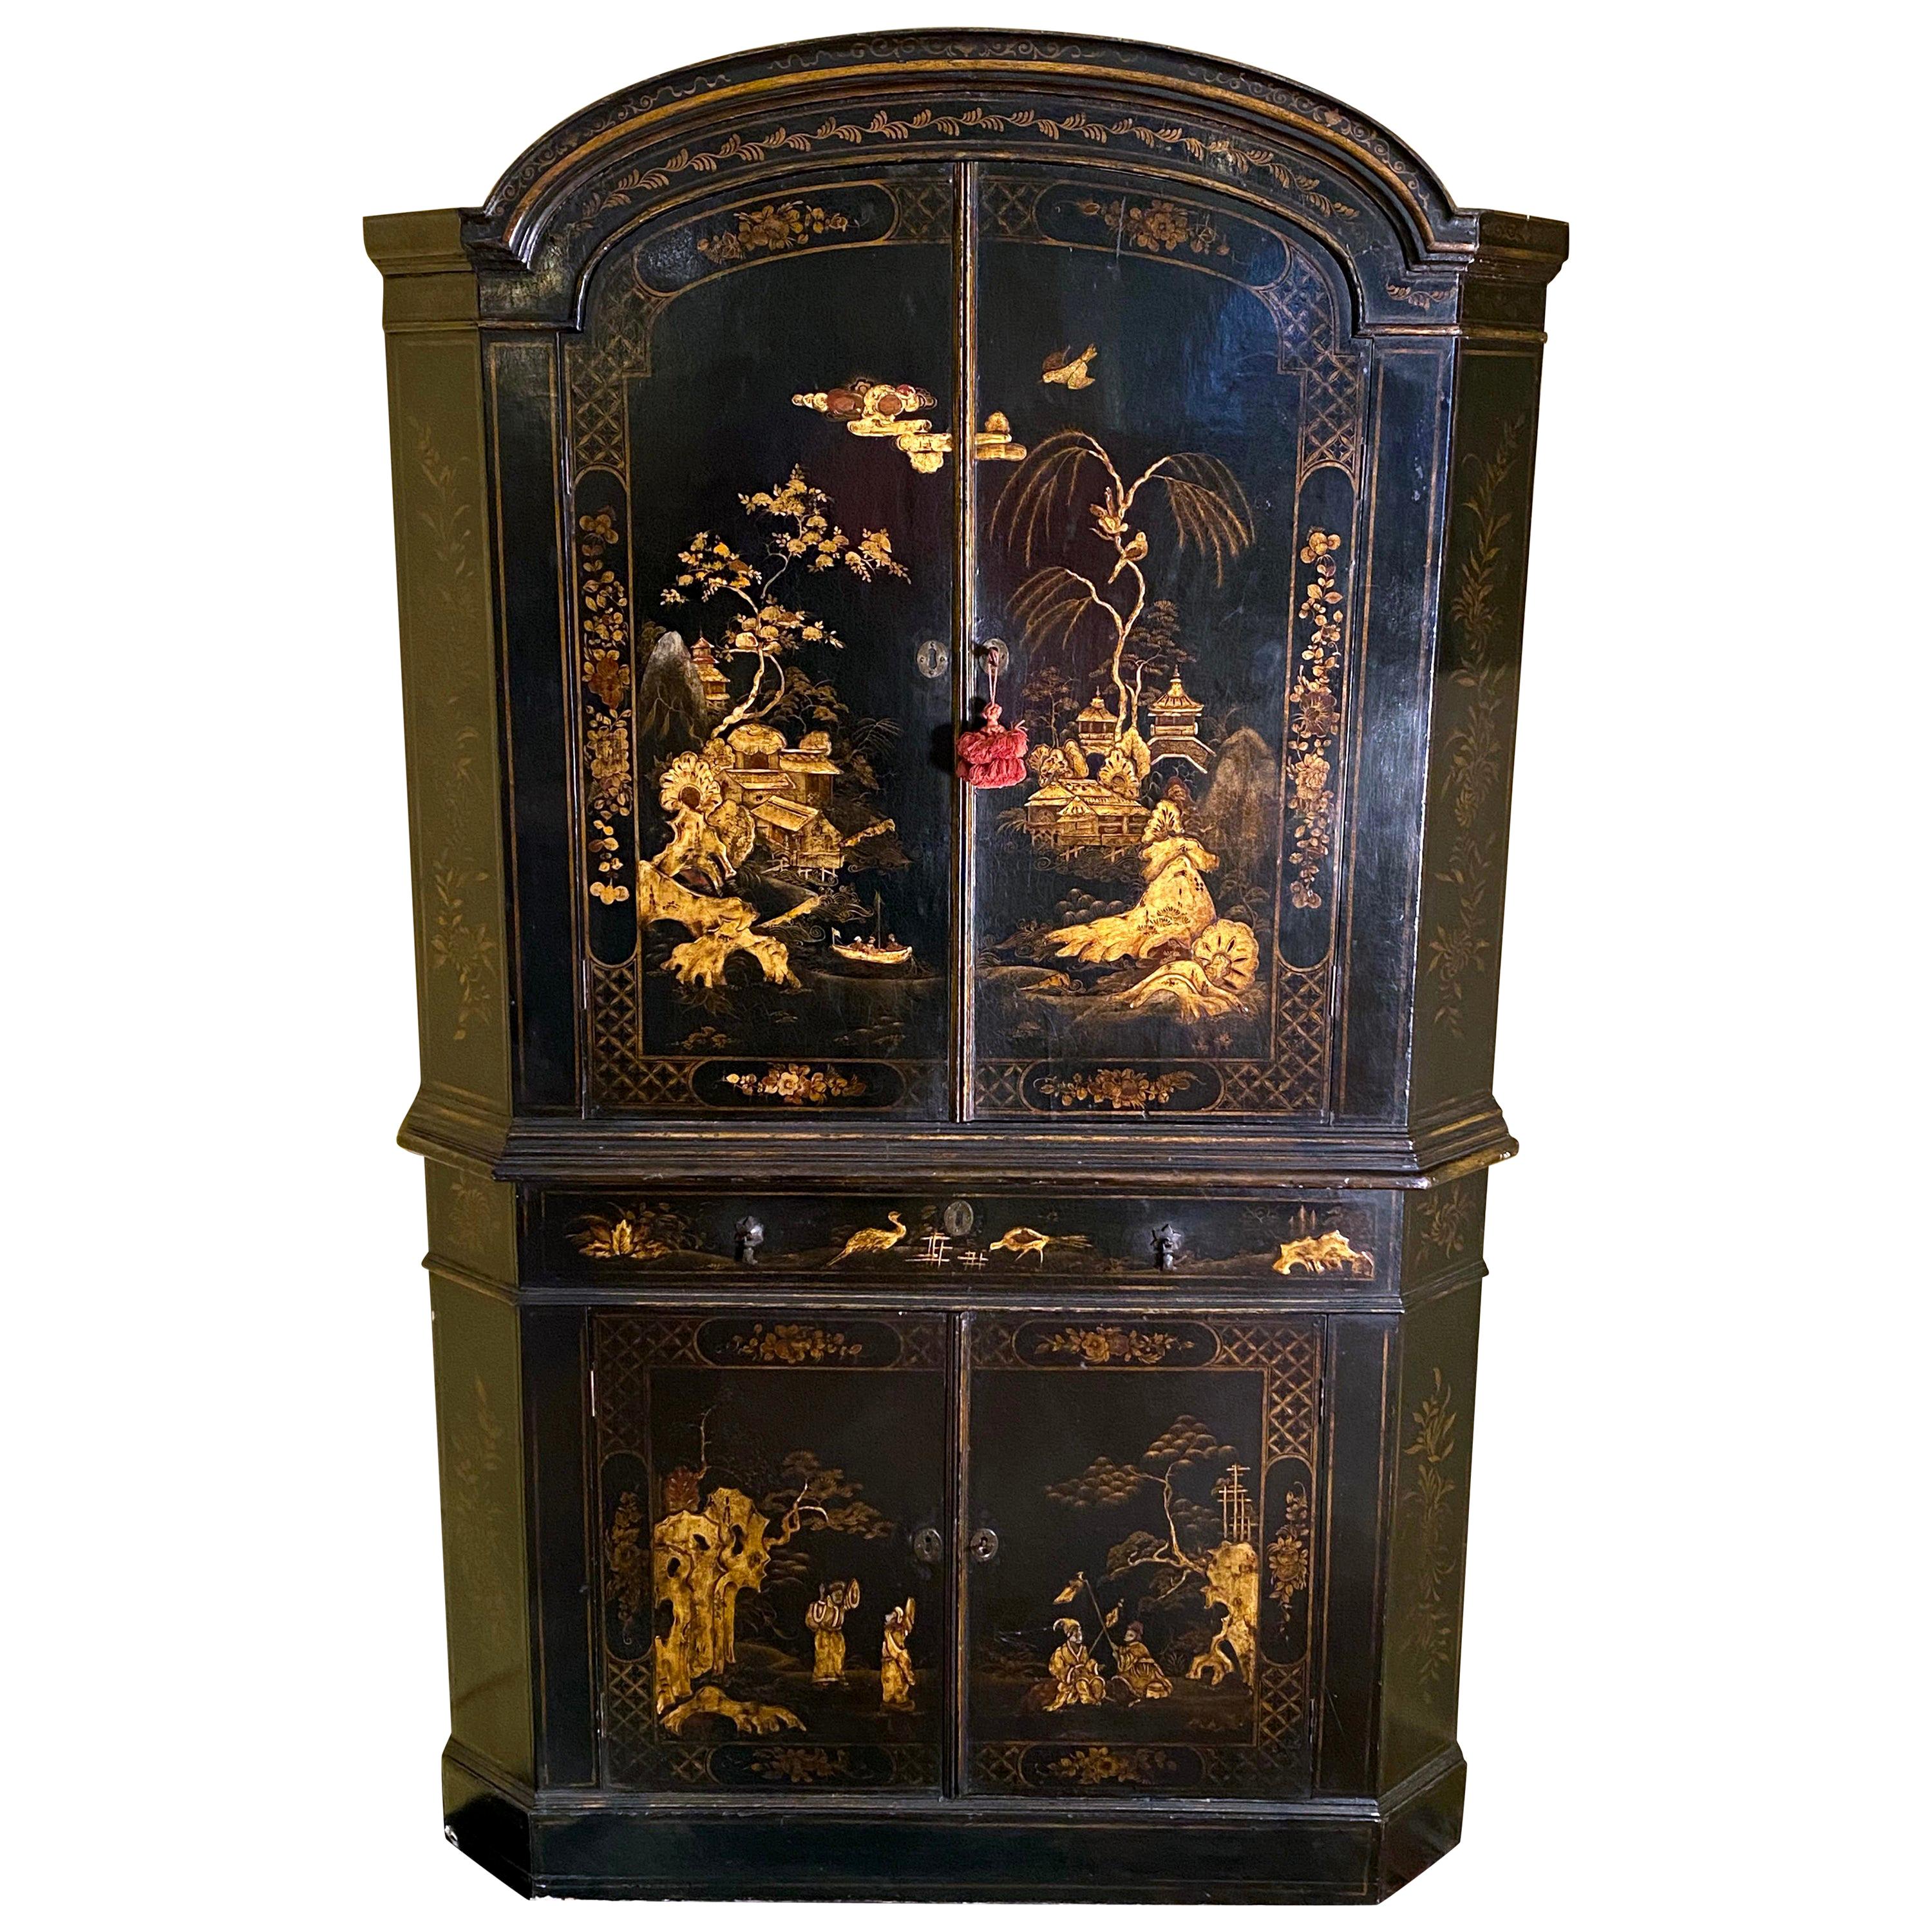 Early 18th Century Japanned Double Corner Cabinet